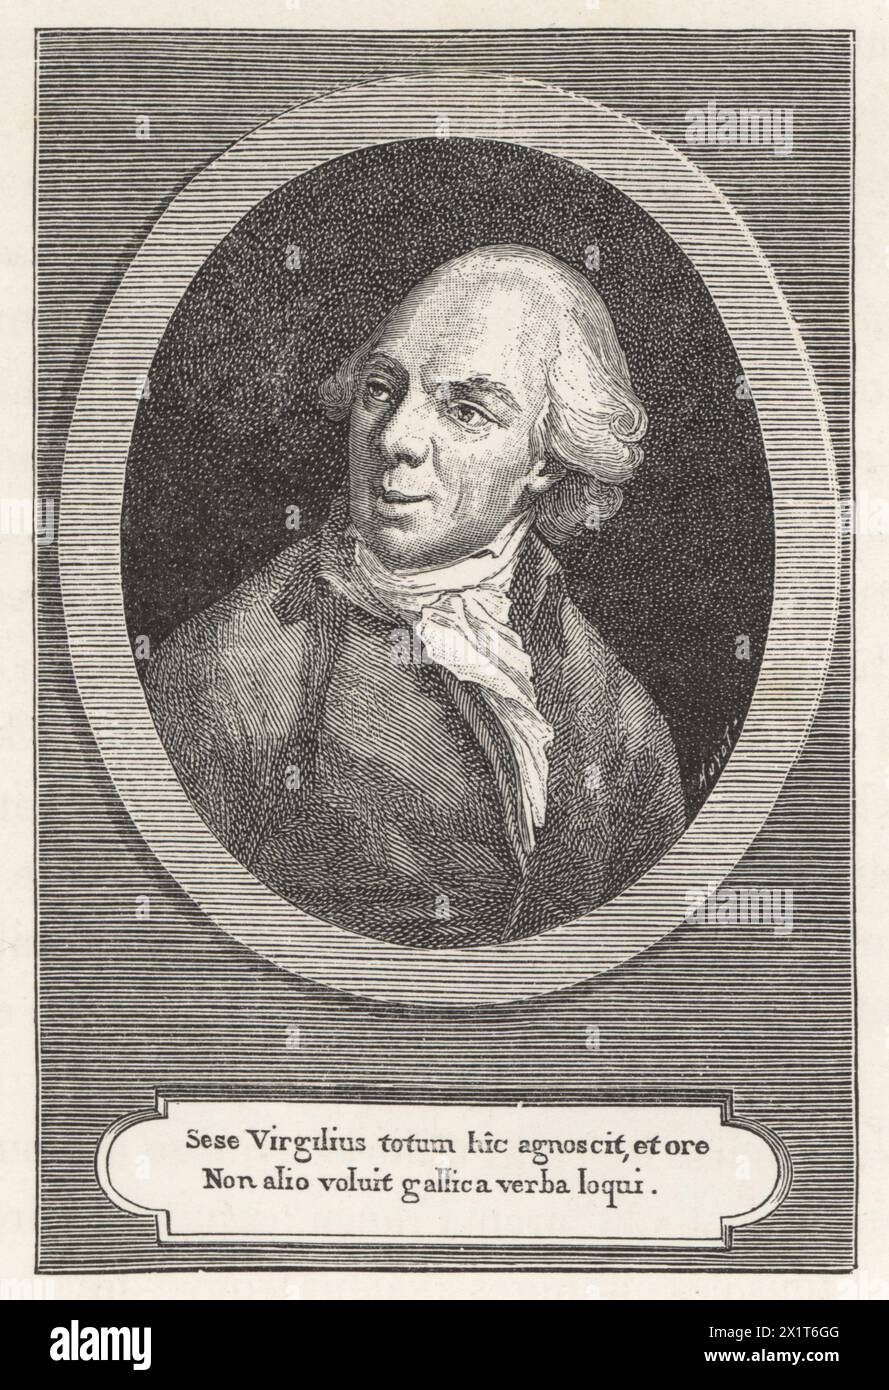 Jacques Delille, French poet, translator of Virgil's Georgics, and author of L'Homme des champs, 1738-1813. With Latin verse. Woodcut by Huyot after an engraving by Gabriel de Saint-Aubin after a portrait by J.-L. Monnier from Paul Lacroix's Directoire, Consulat et Empire, (Directory, Consulate and Empire), Paris, 1884. Stock Photo